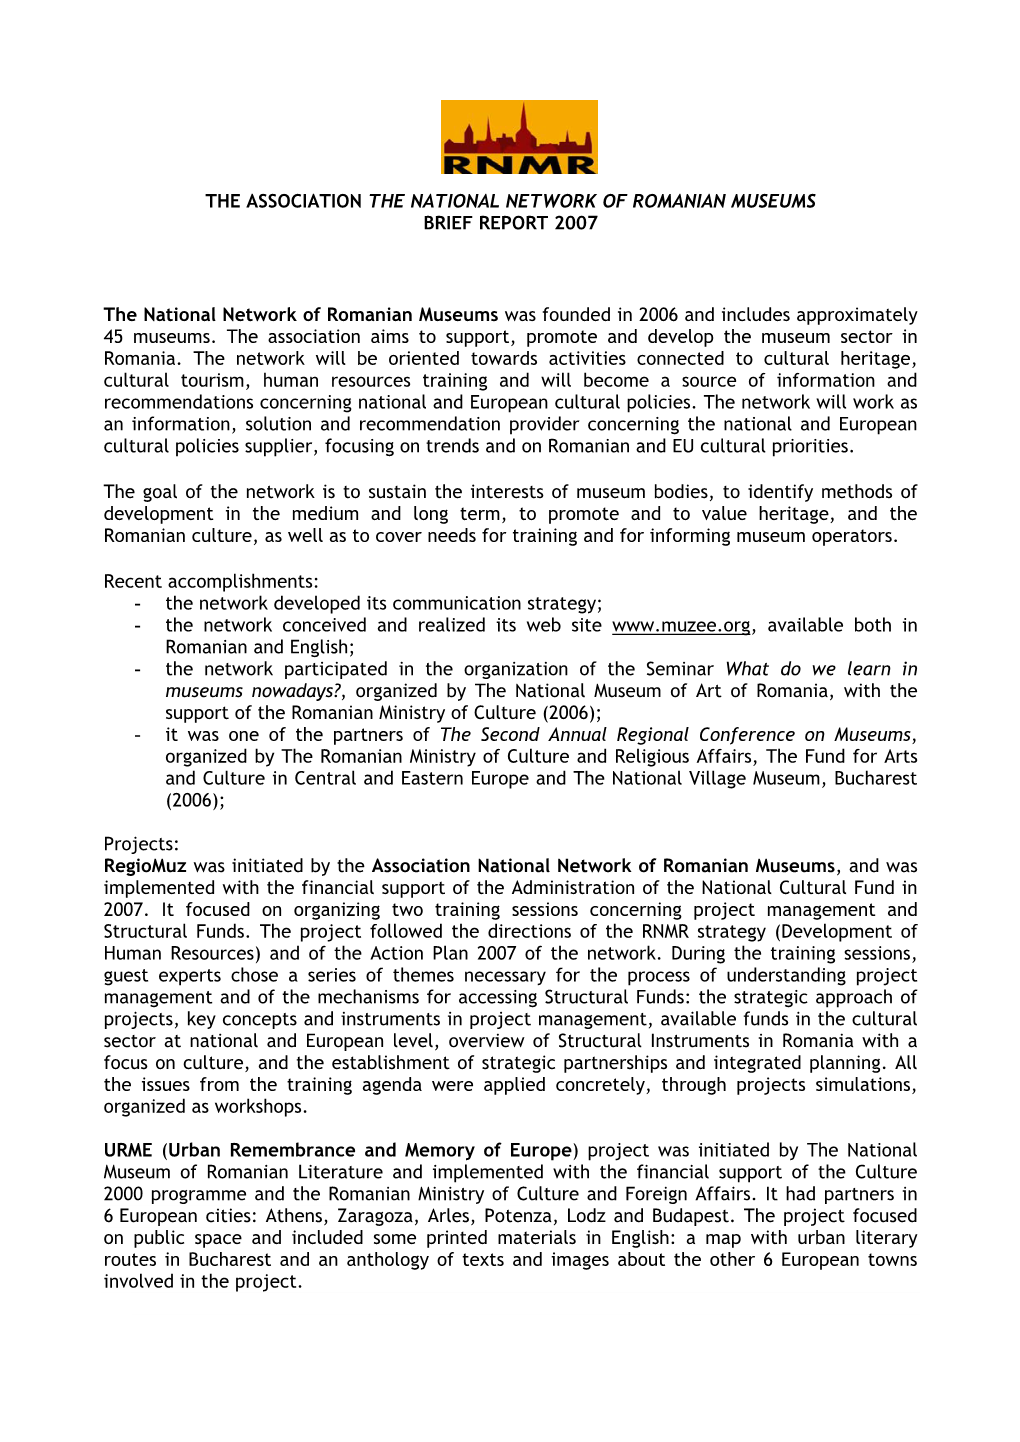 The Association the National Network of Romanian Museums Brief Report 2007